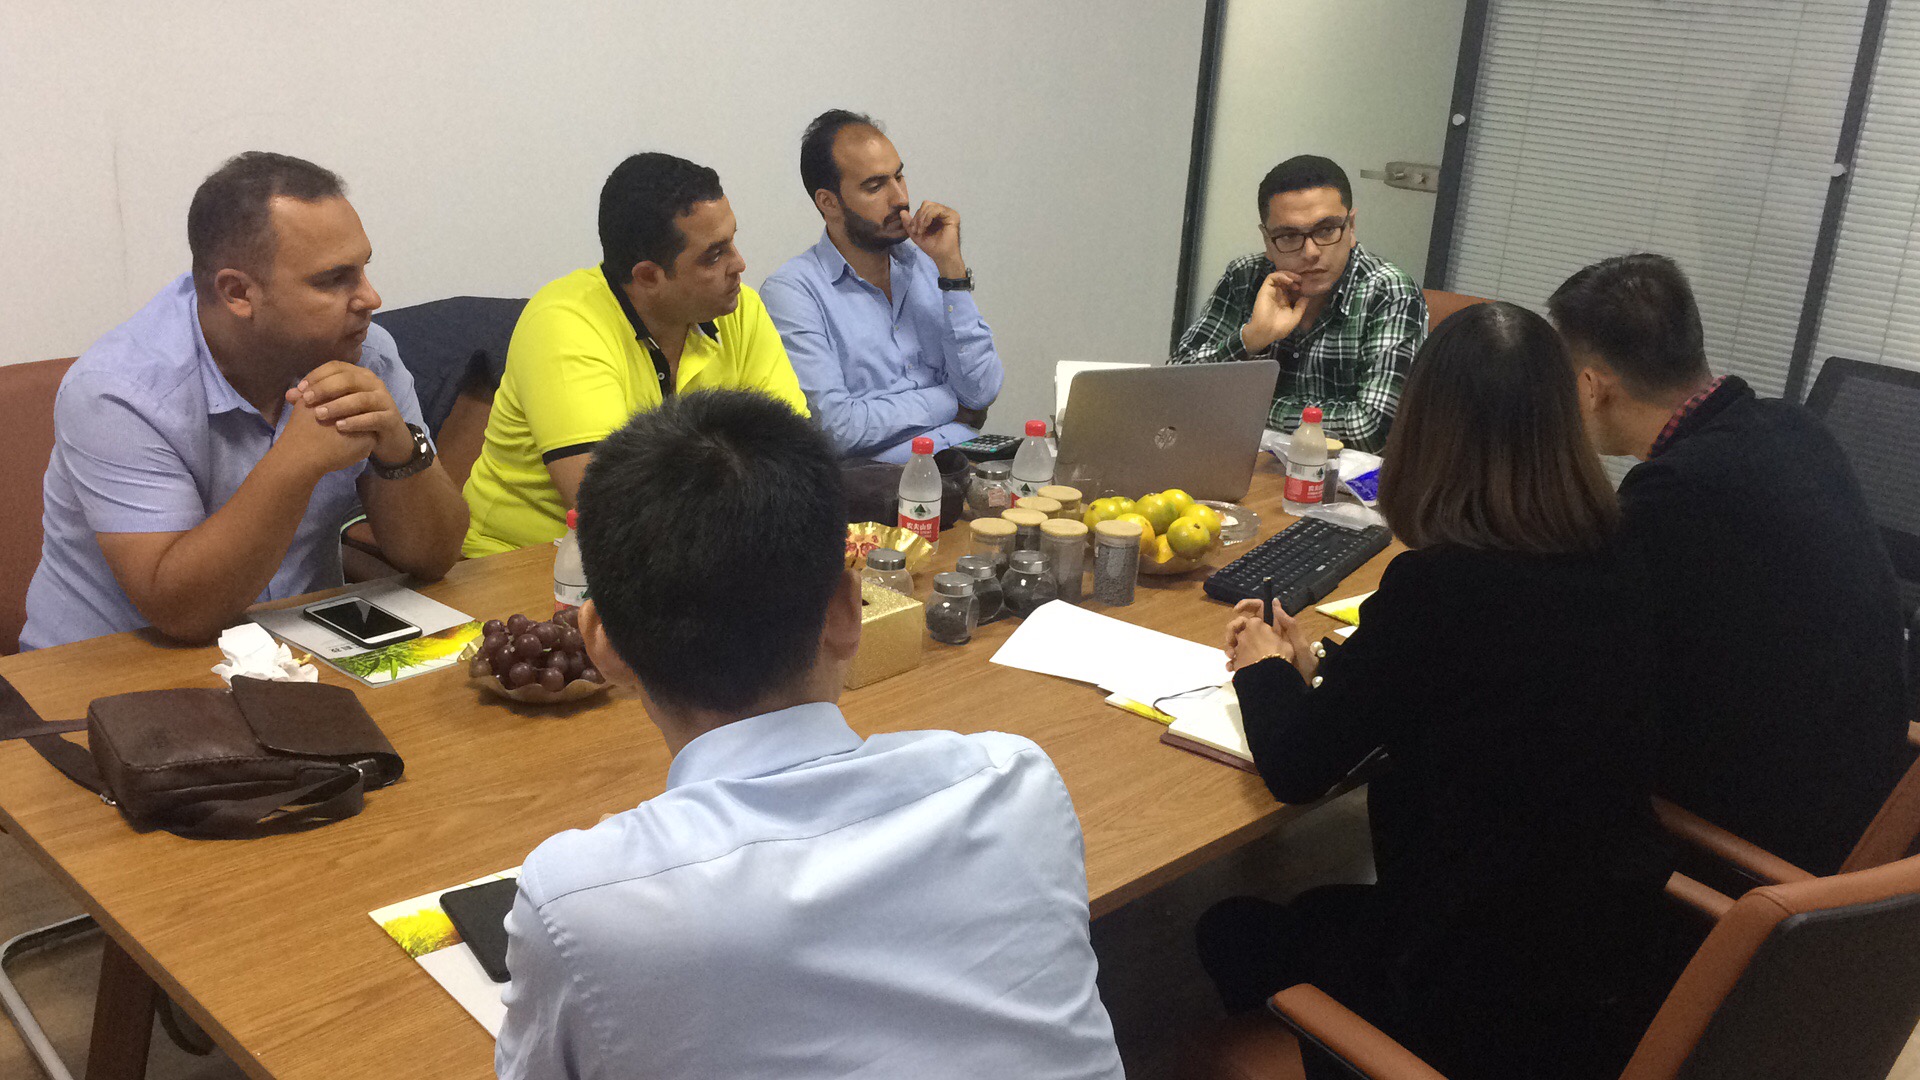 MFP staff is negotiating projects with clients in the meeting room